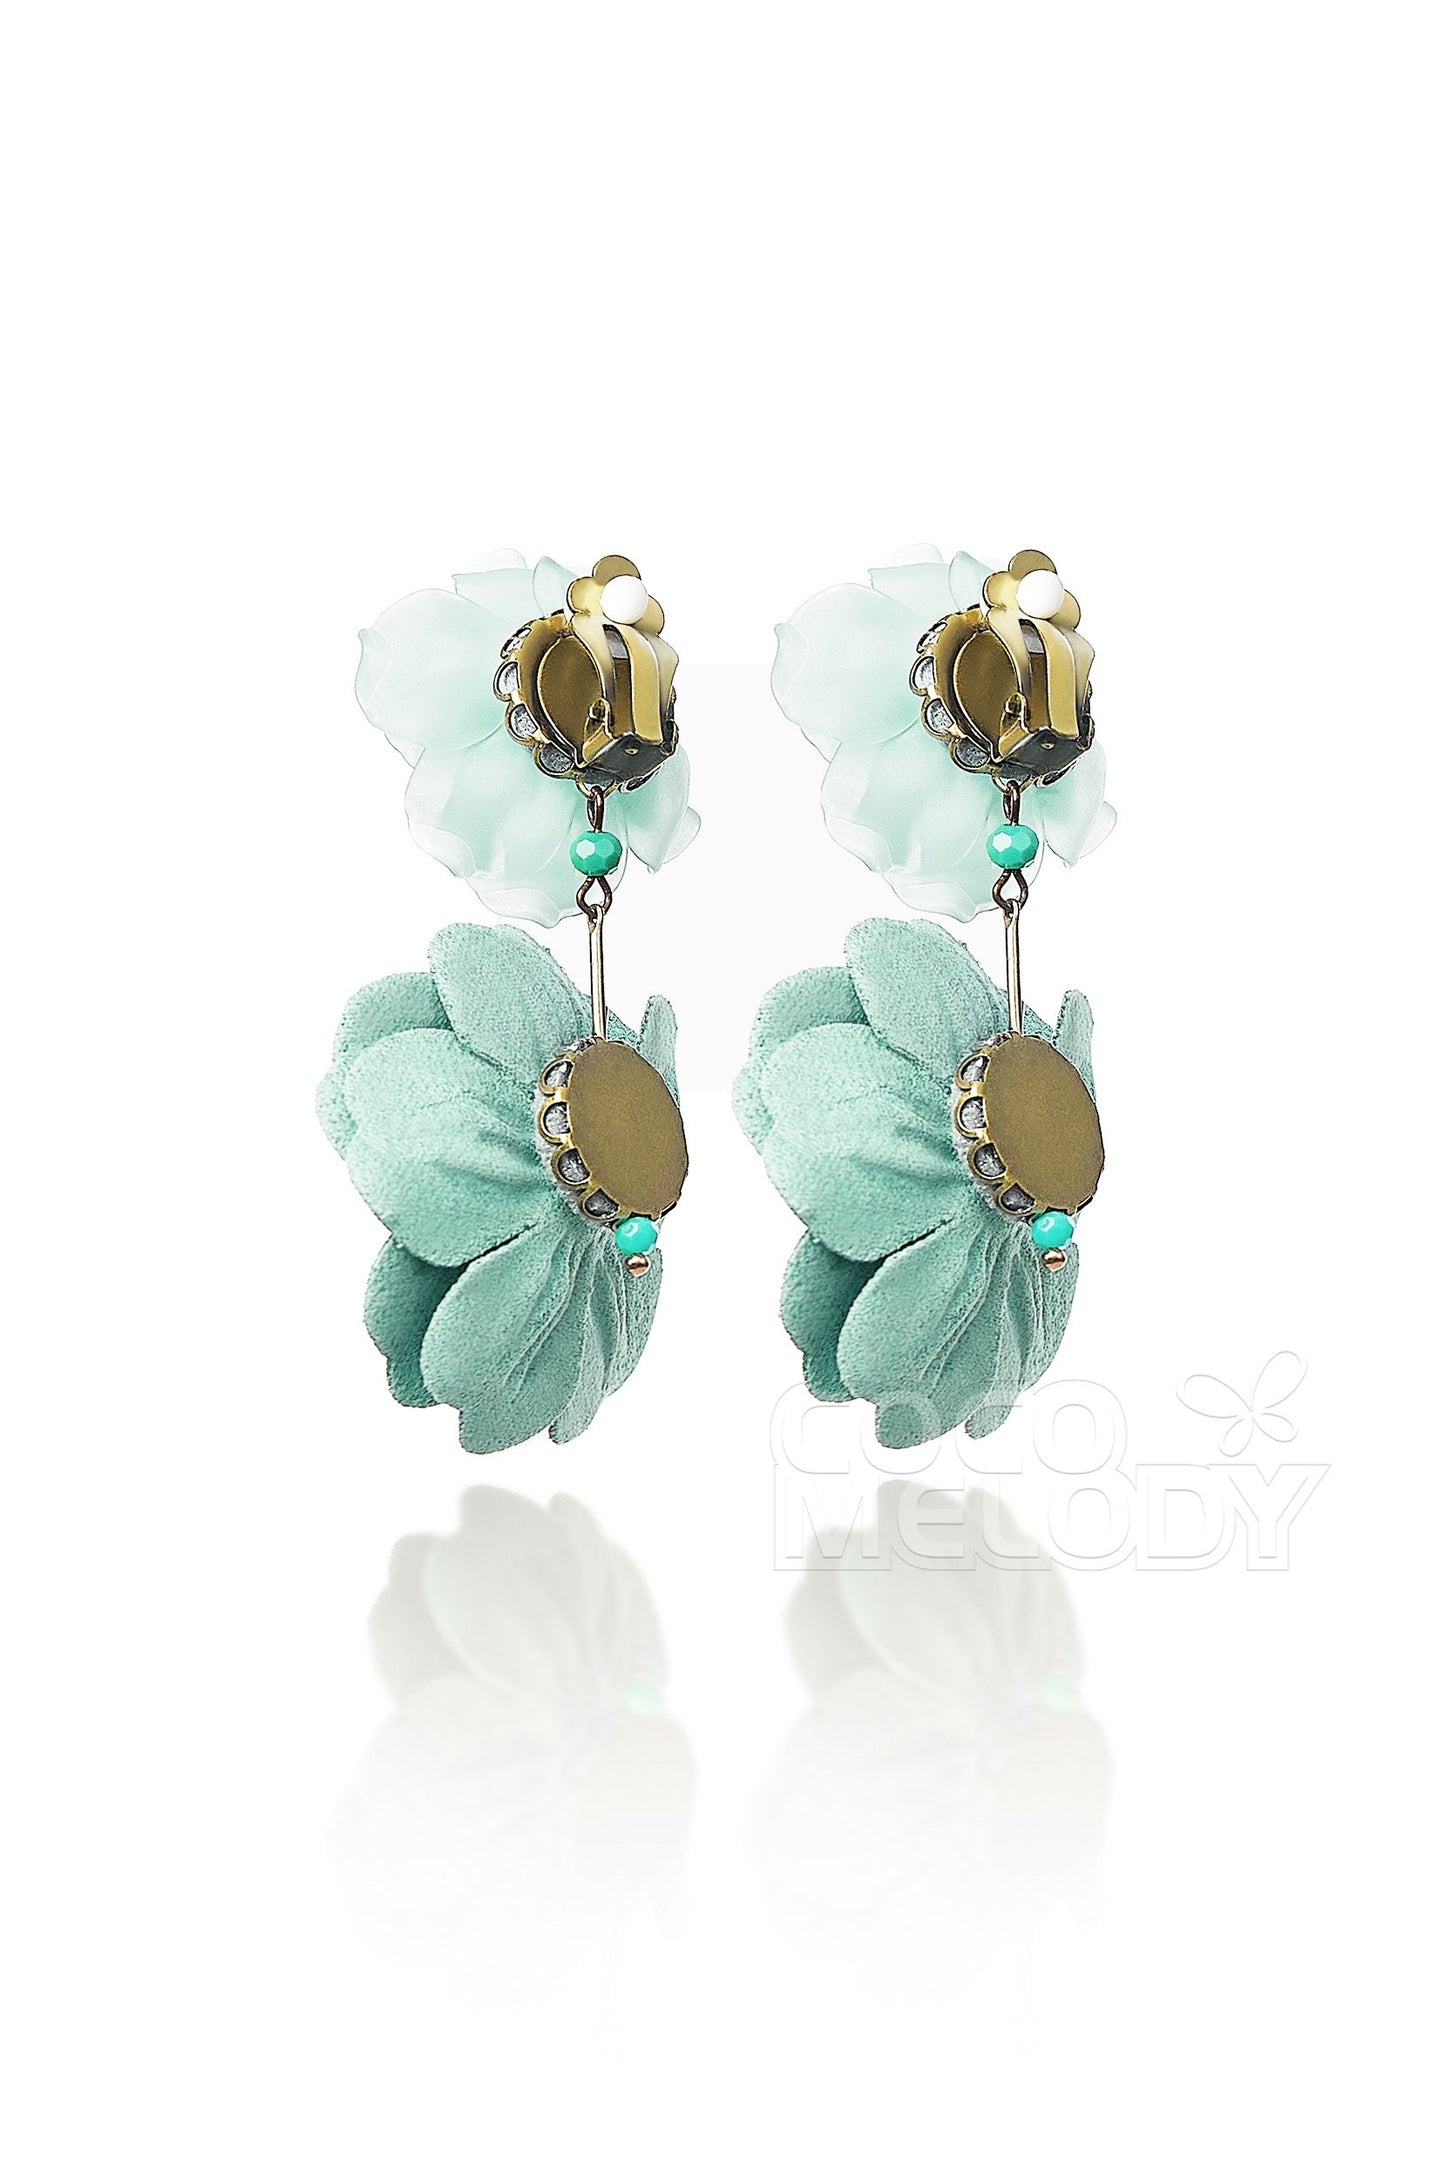 Fashion Flower Wedding Earrings with Beading HG18002